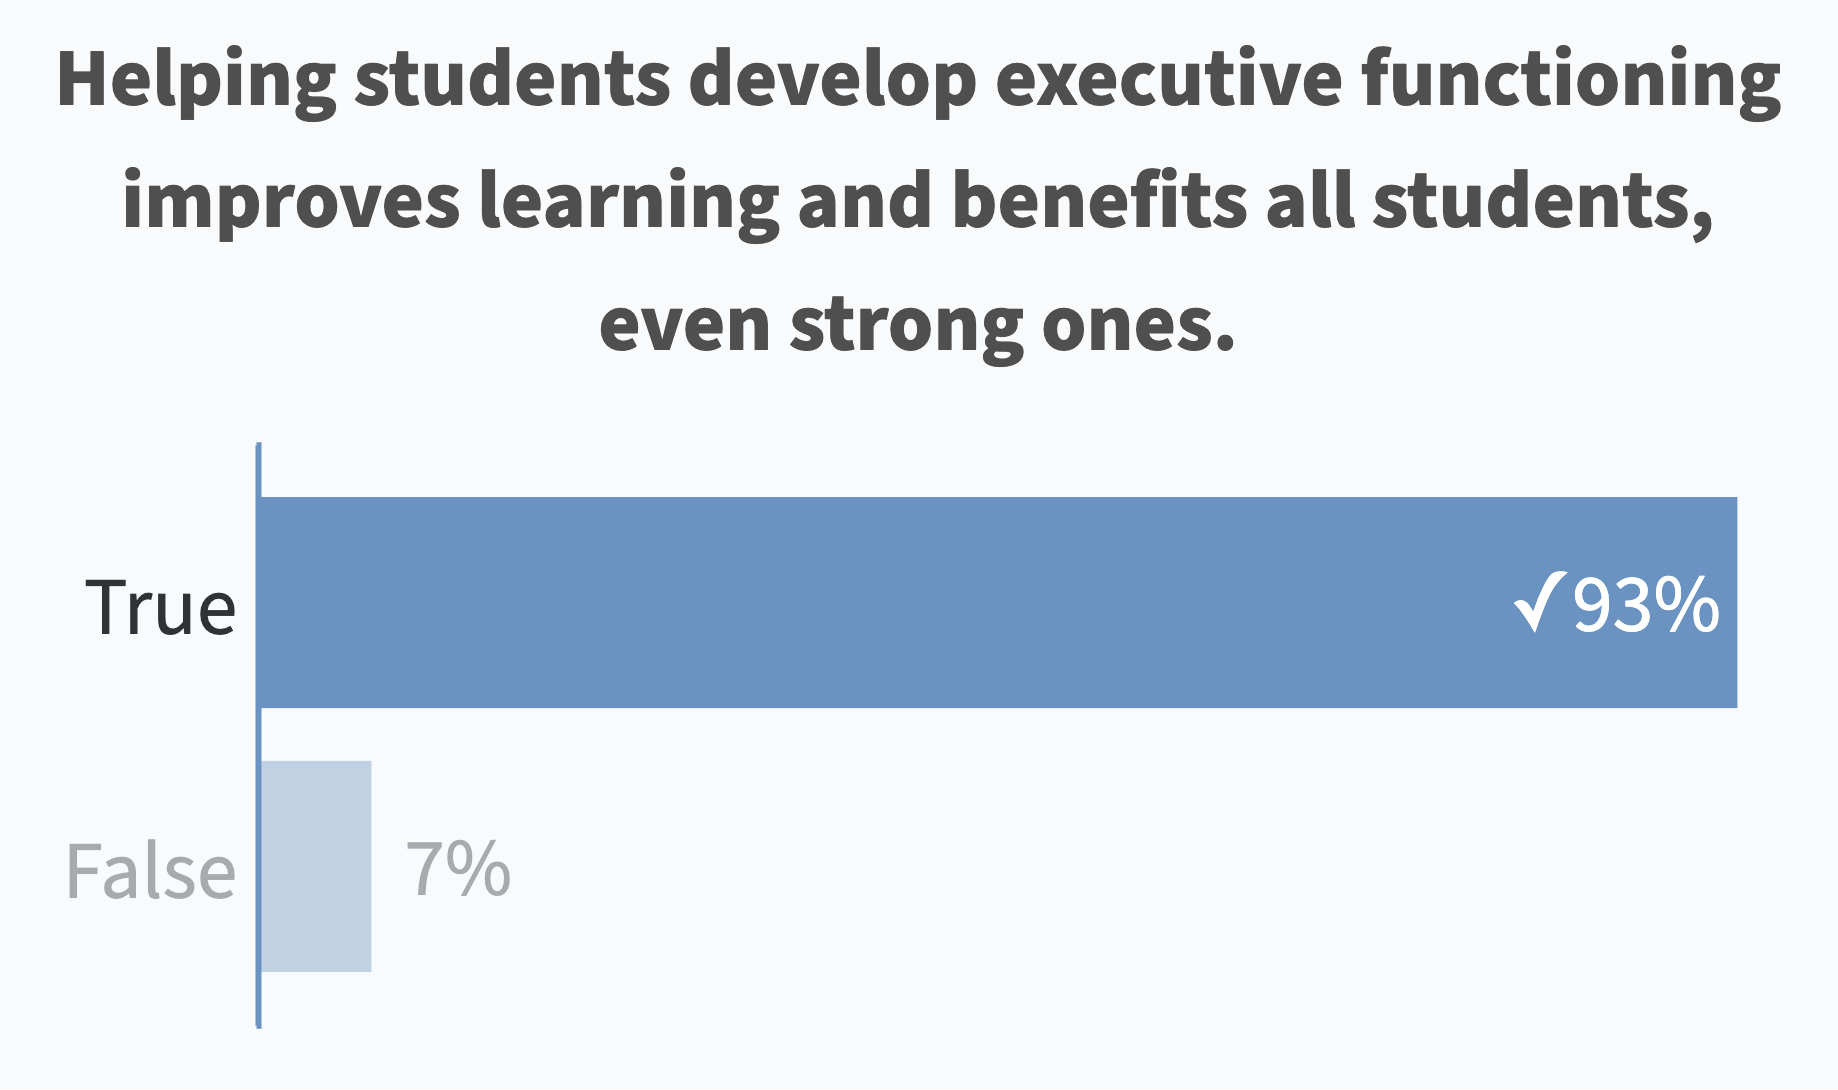 Helping students develop executive functioning improves learning and benefits all students, even strong ones. (True: 93% correct)